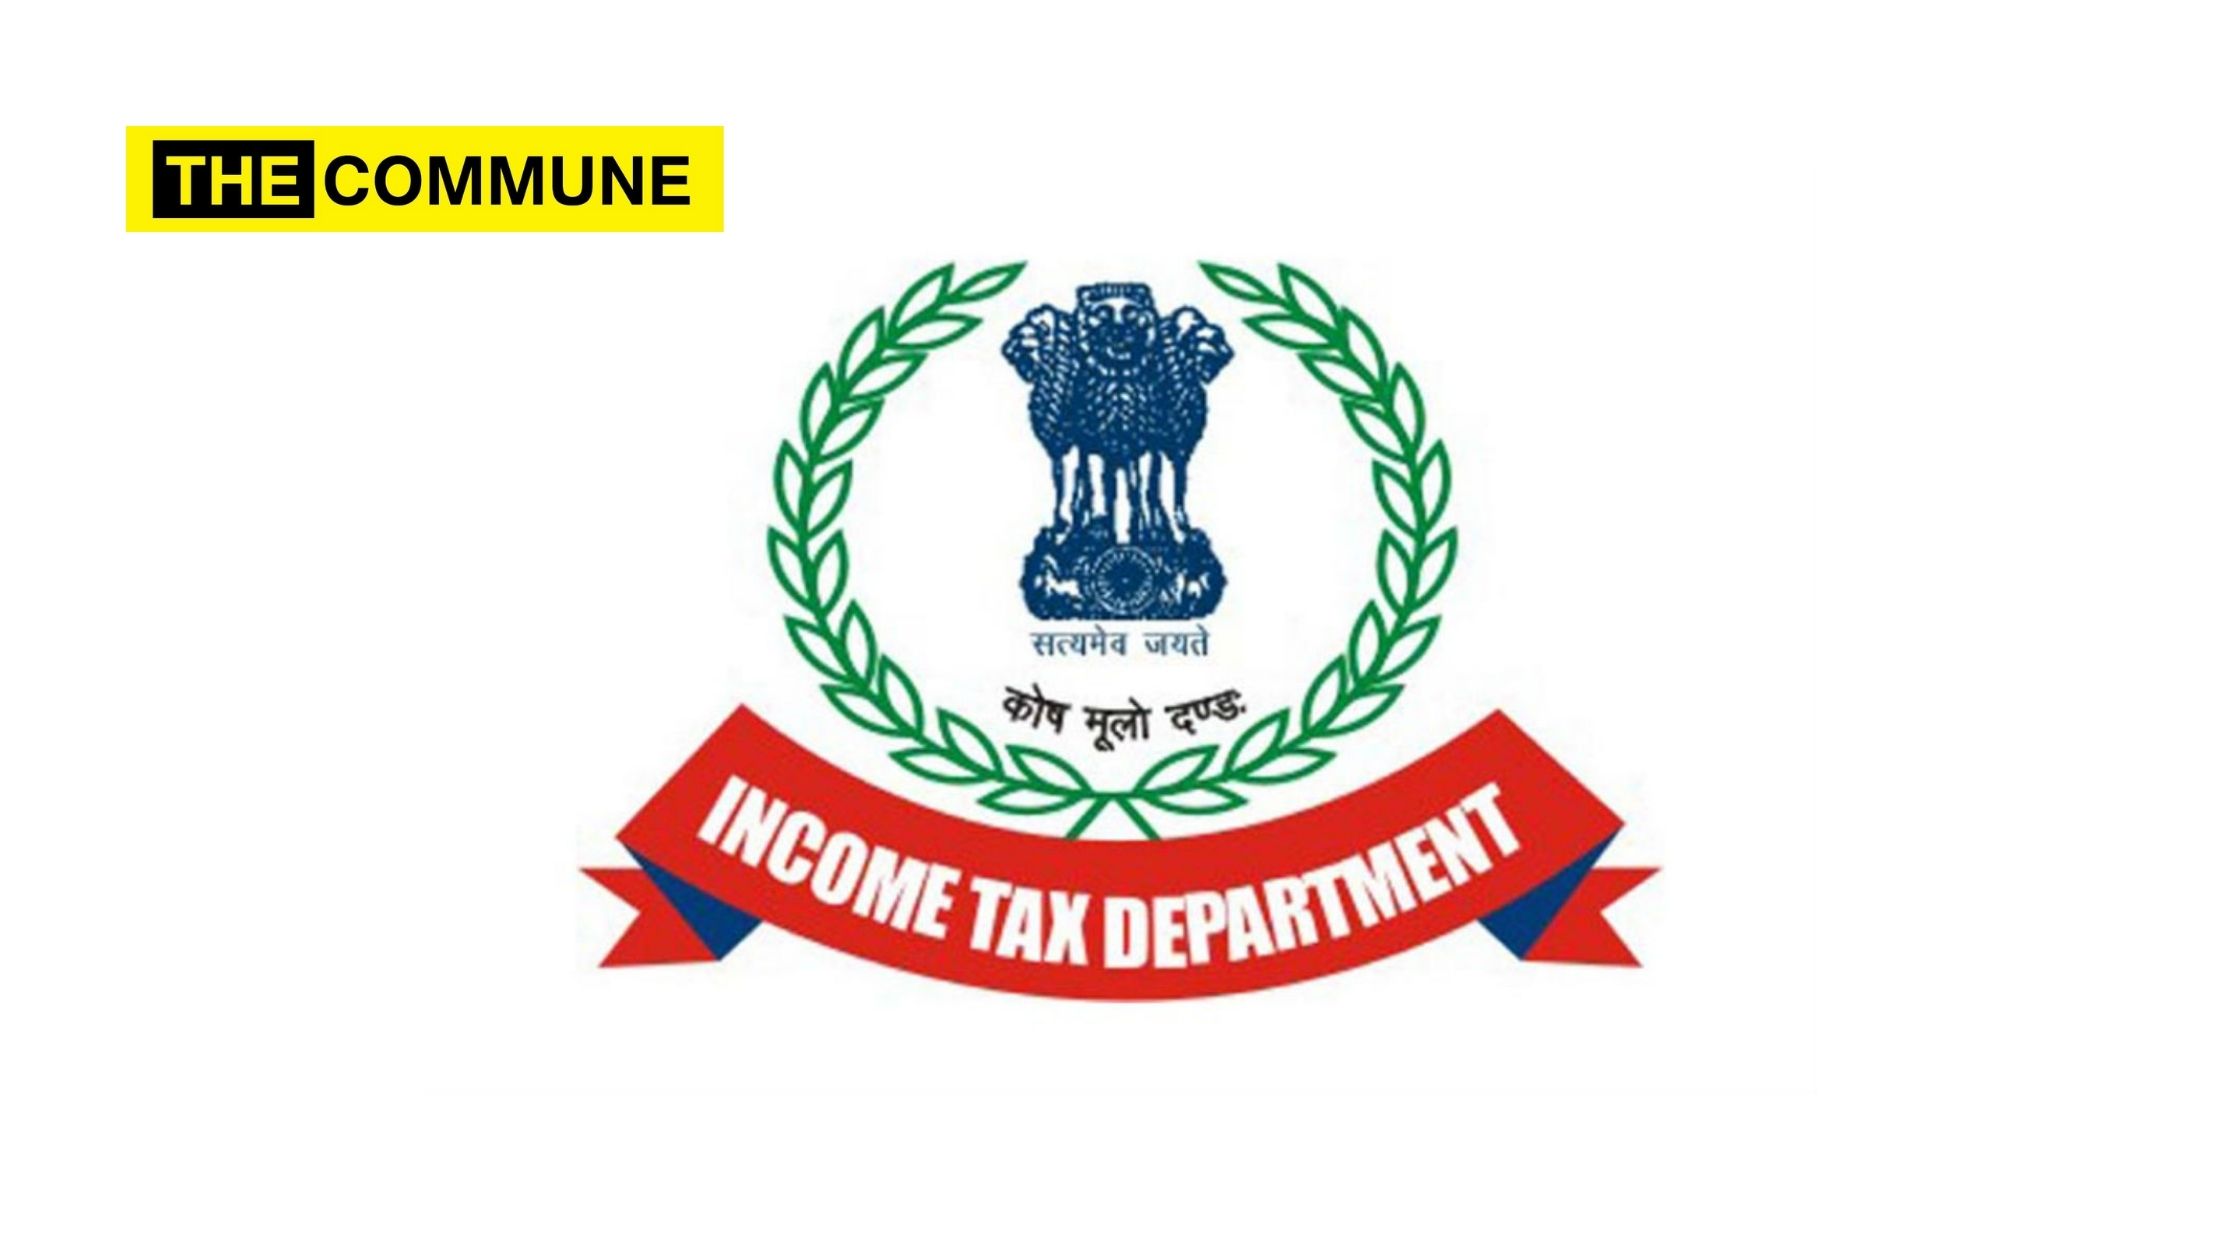 Tax Department conducts searches in Hyderabad The Commune